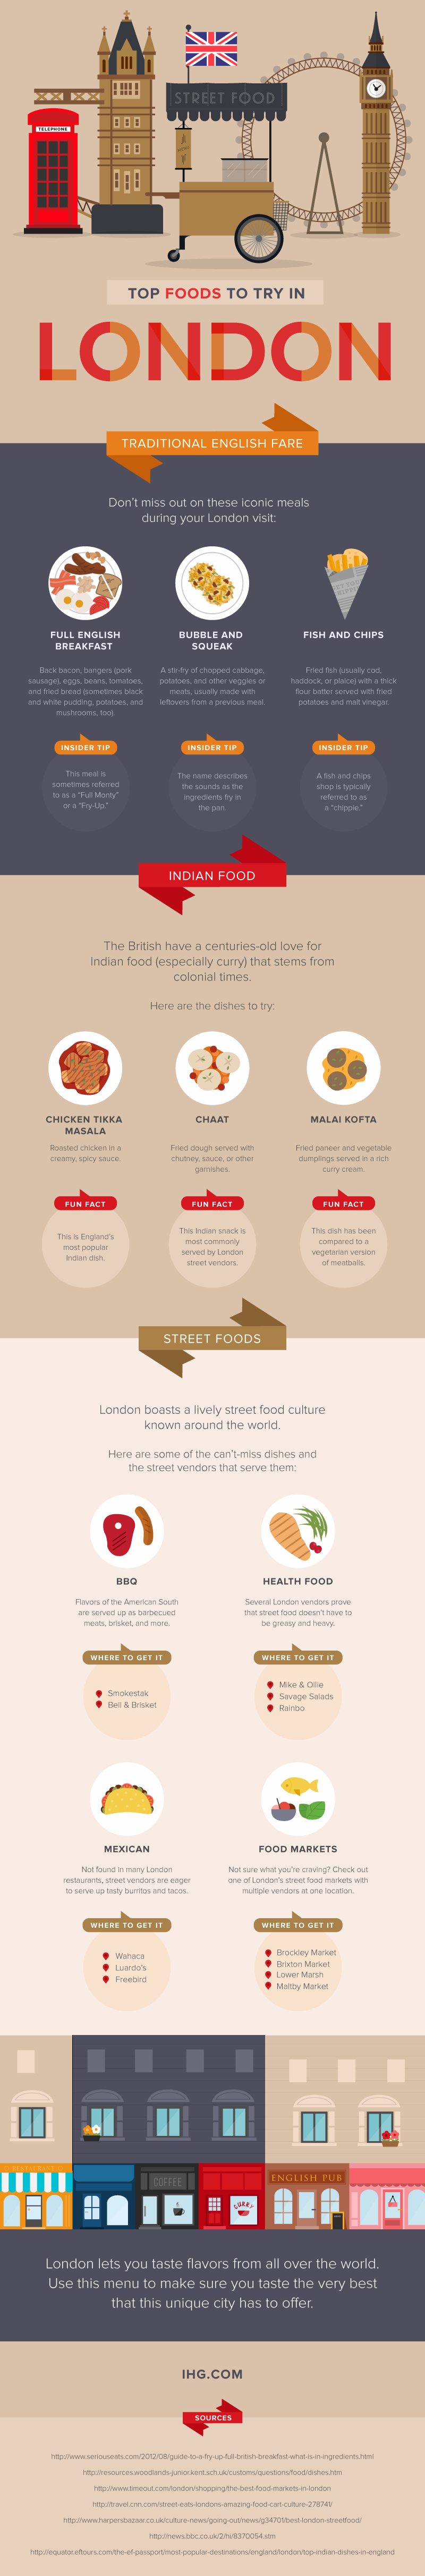 Top Food to Try in London [infographic]